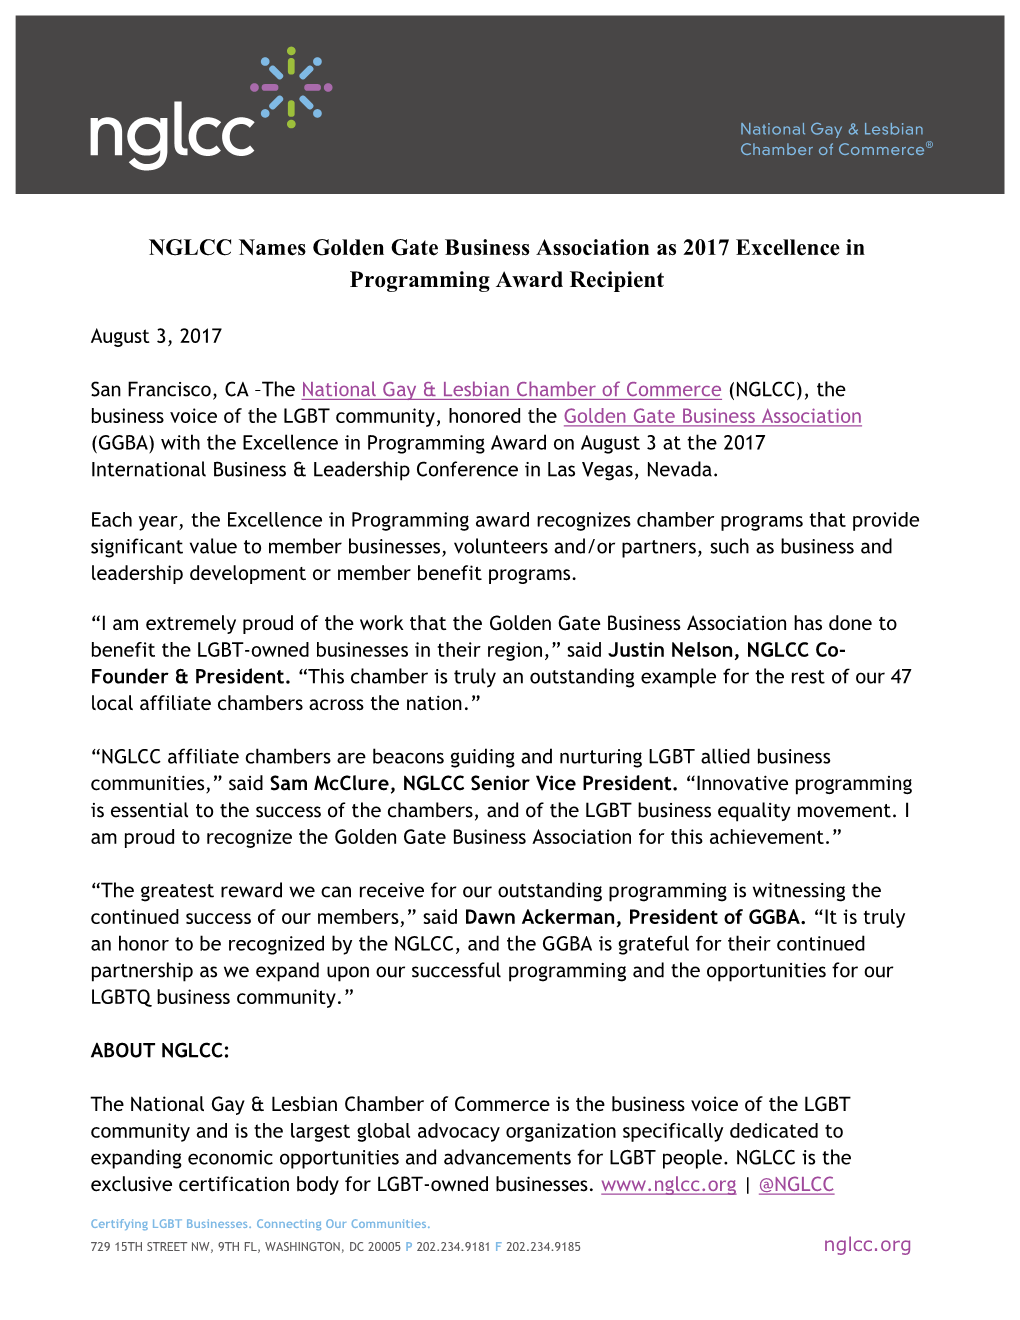 NGLCC Names Golden Gate Business Association As 2017 Excellence in Programming Award Recipient